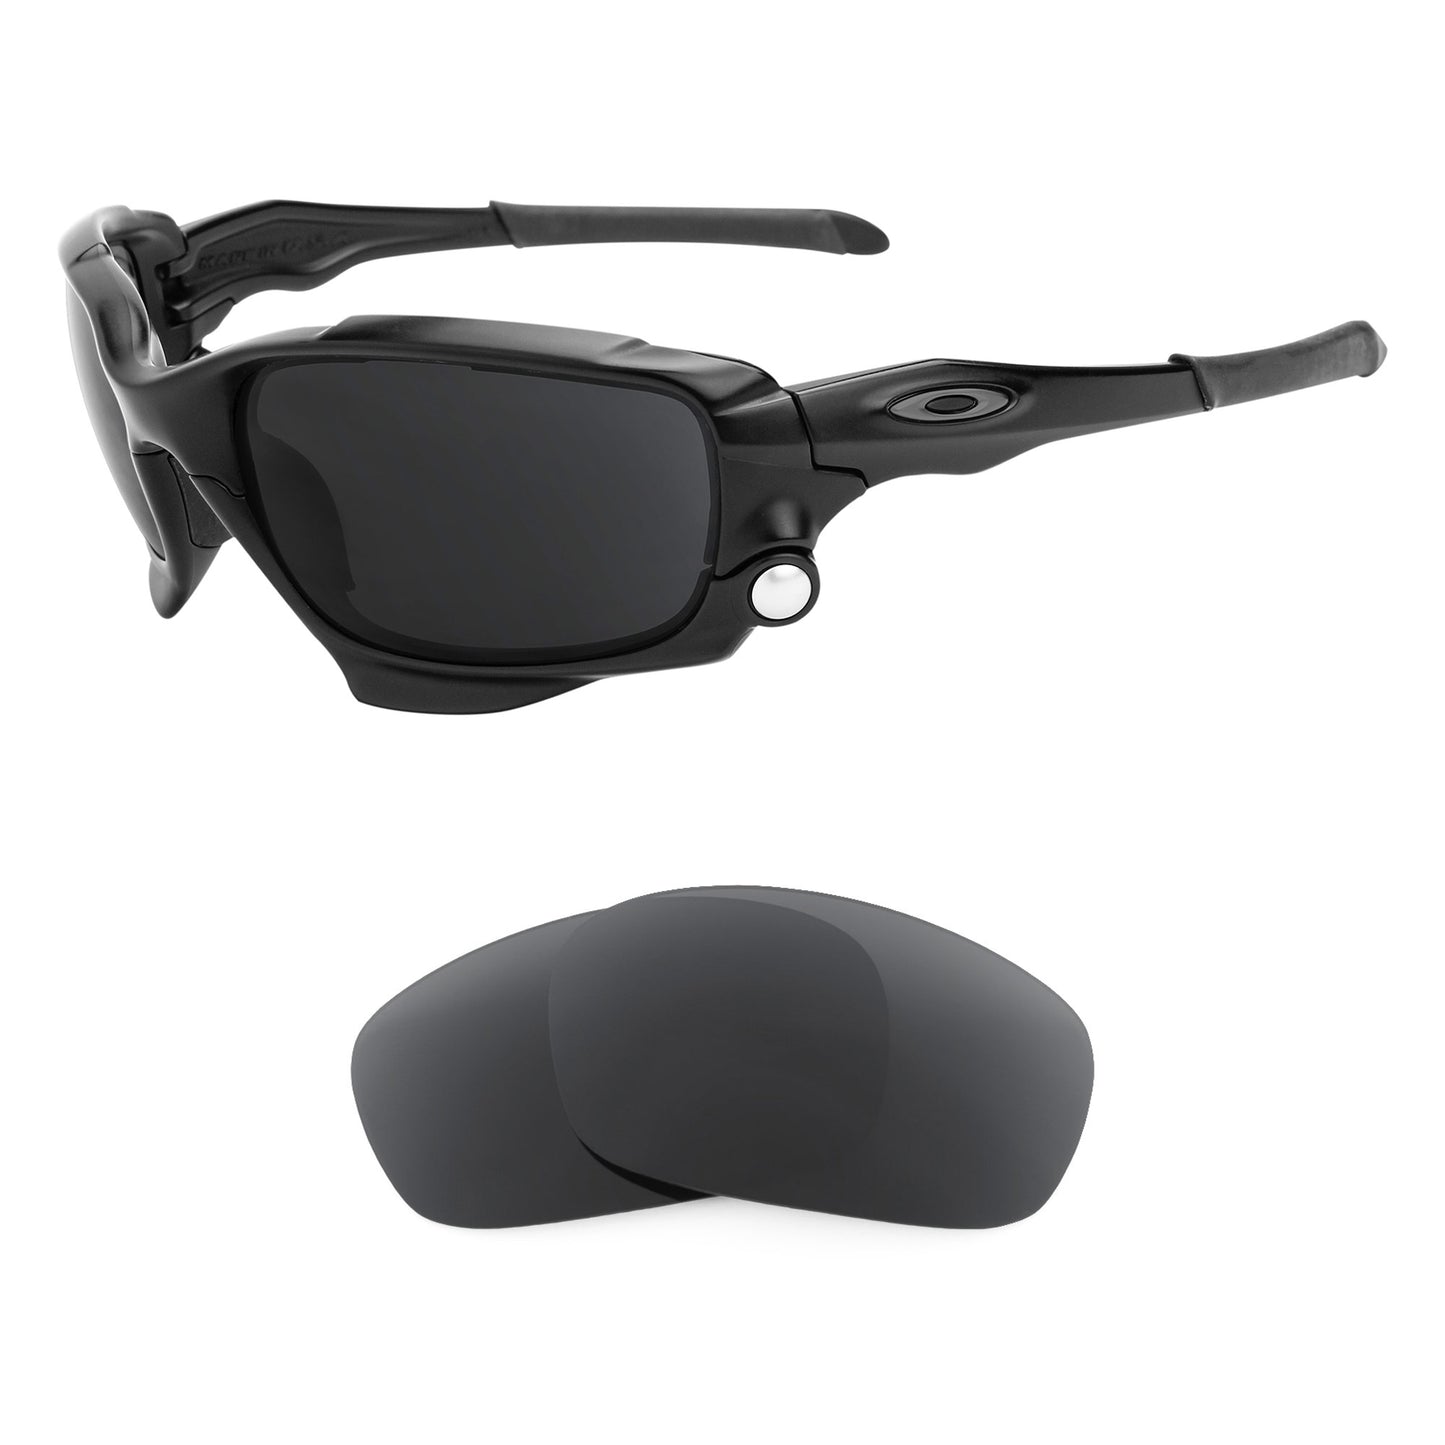 Oakley Jawbone sunglasses with replacement lenses